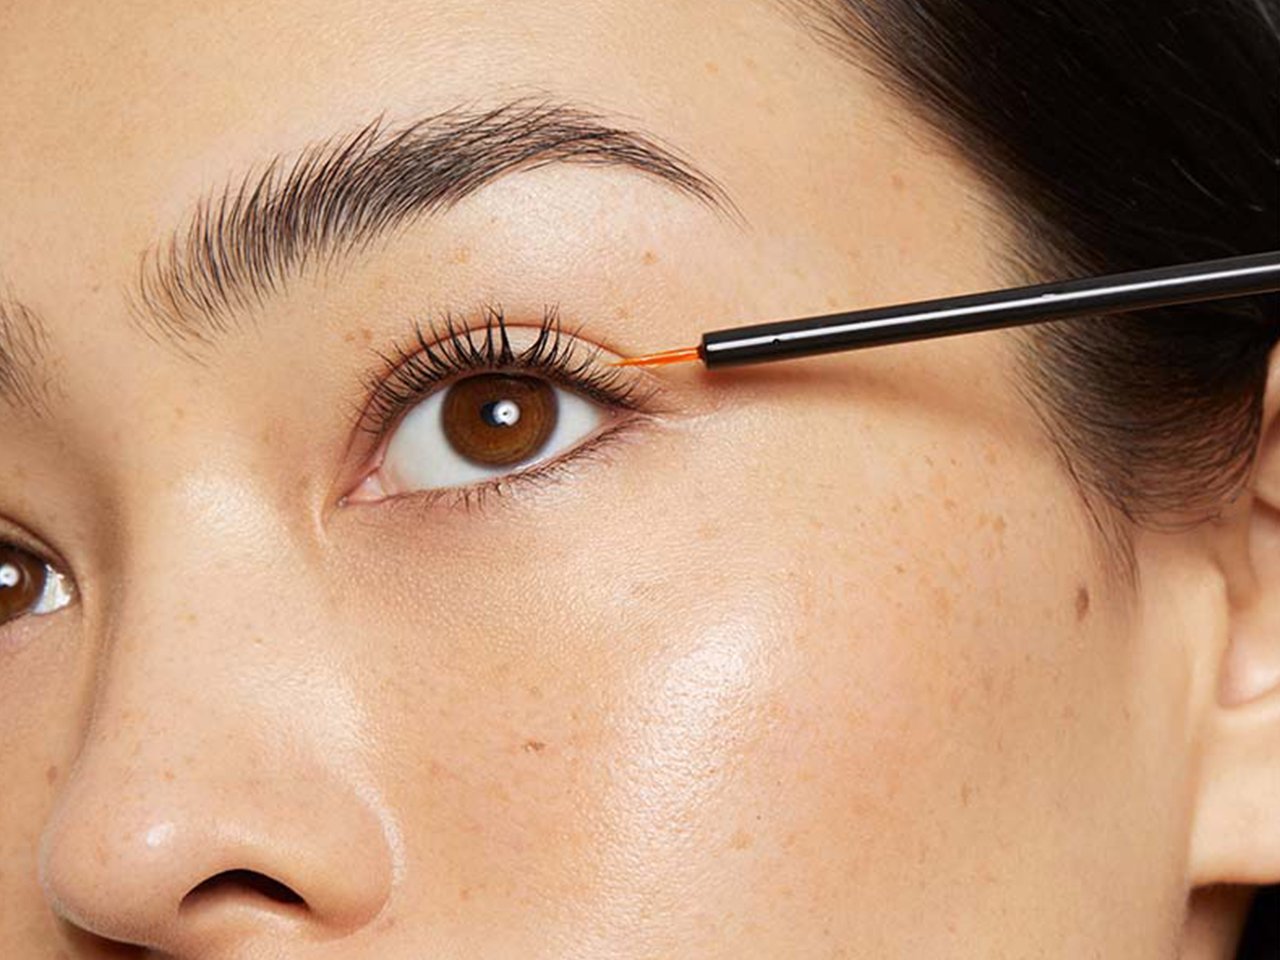 A model seen close-up applying lash serum to her lash line with a small brush.